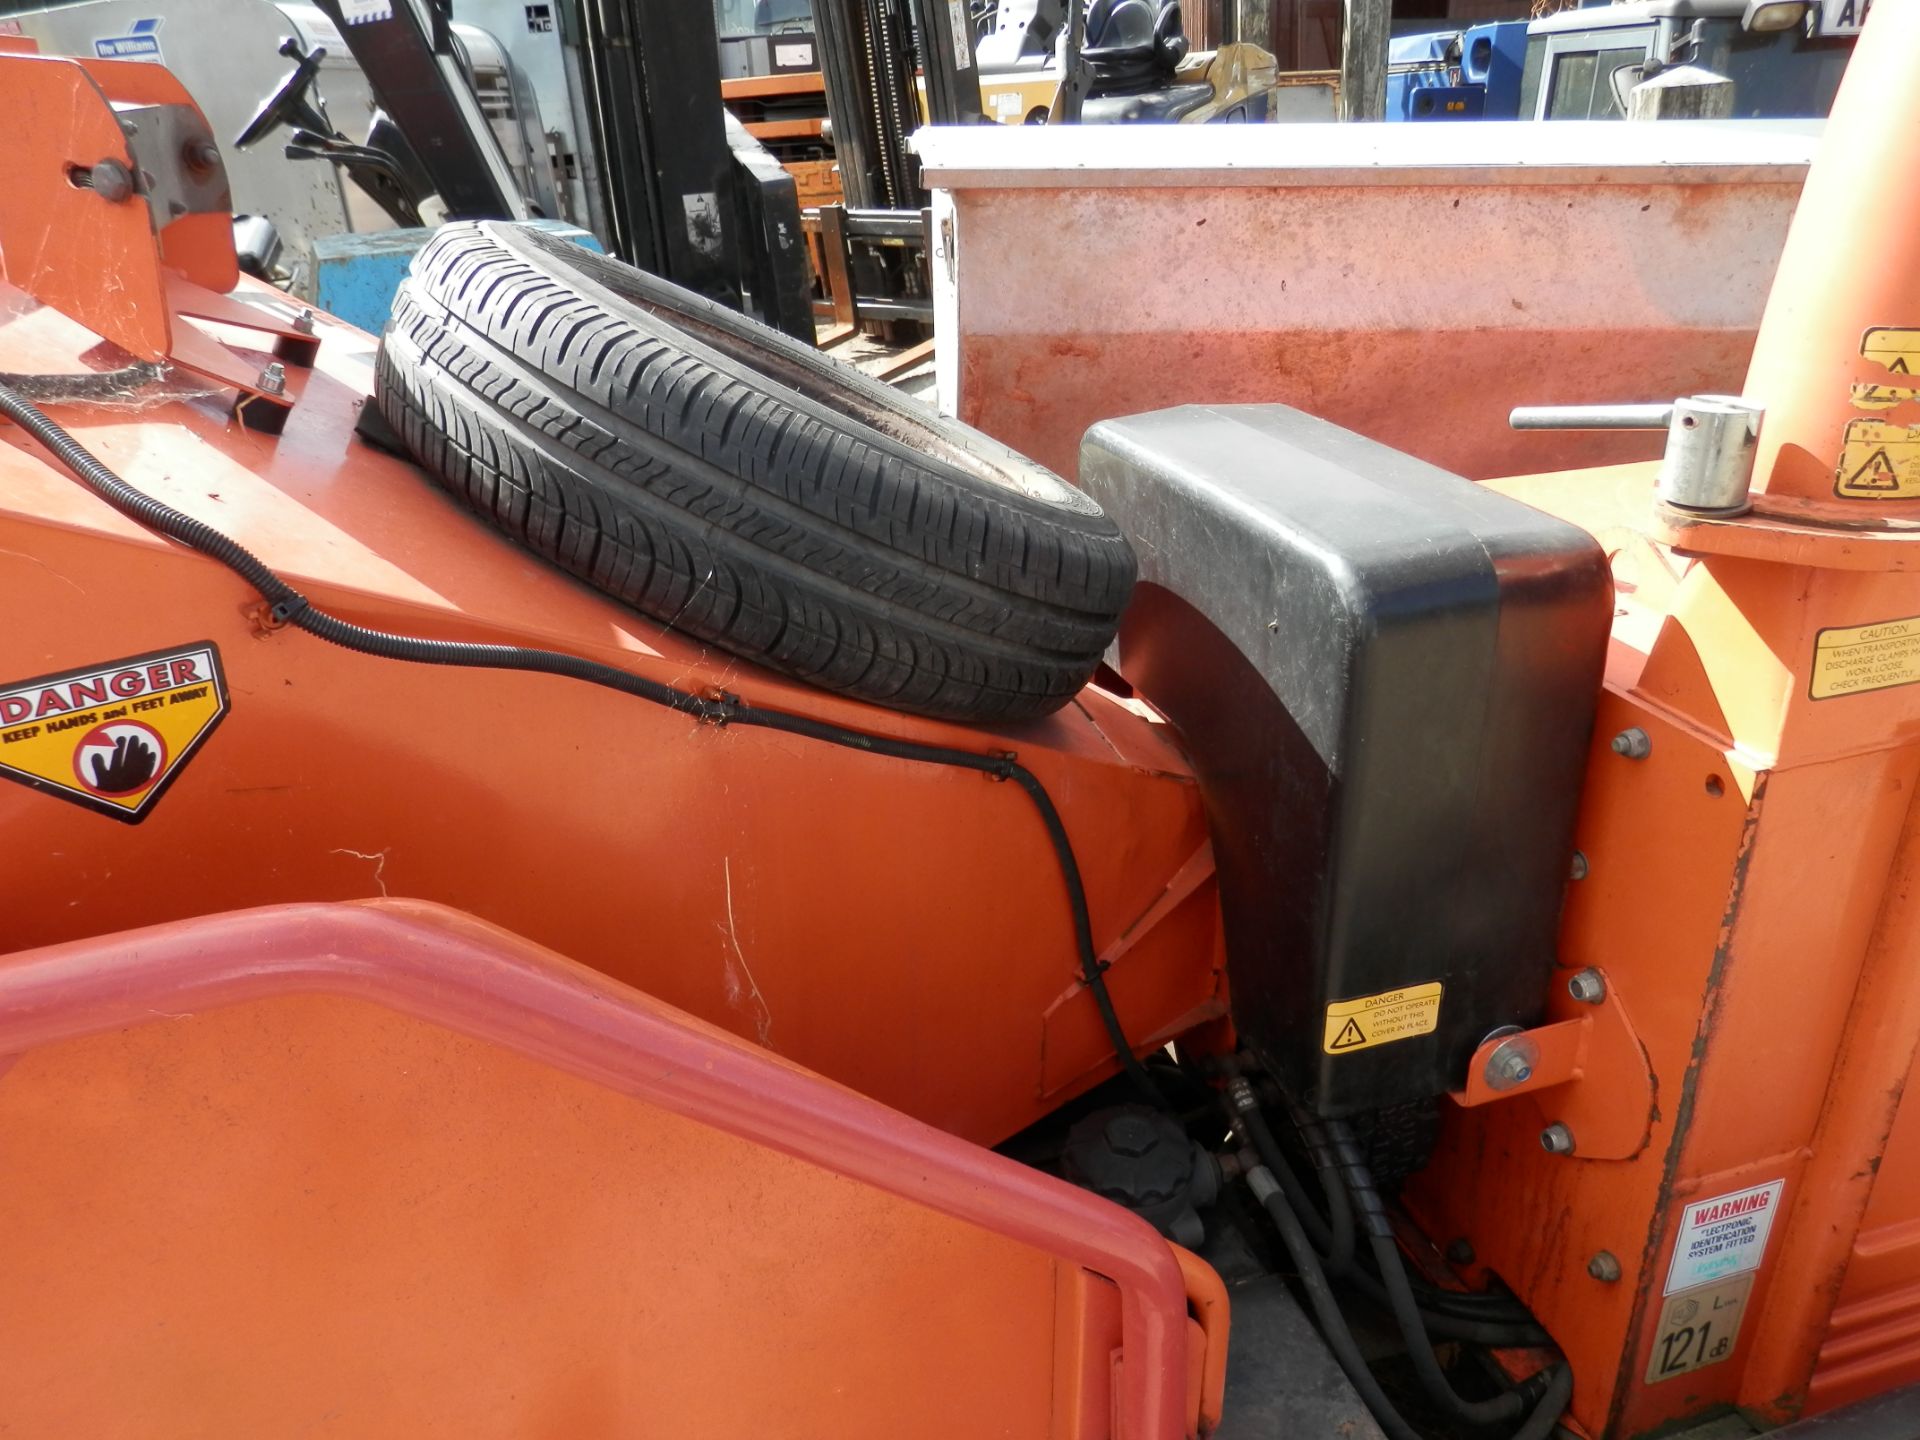 2002 TIMBERWOLF KUBOTA ENGINED DIESEL CHIPPER, TRAILERED UNIT. ALL WORKING. - Image 6 of 6